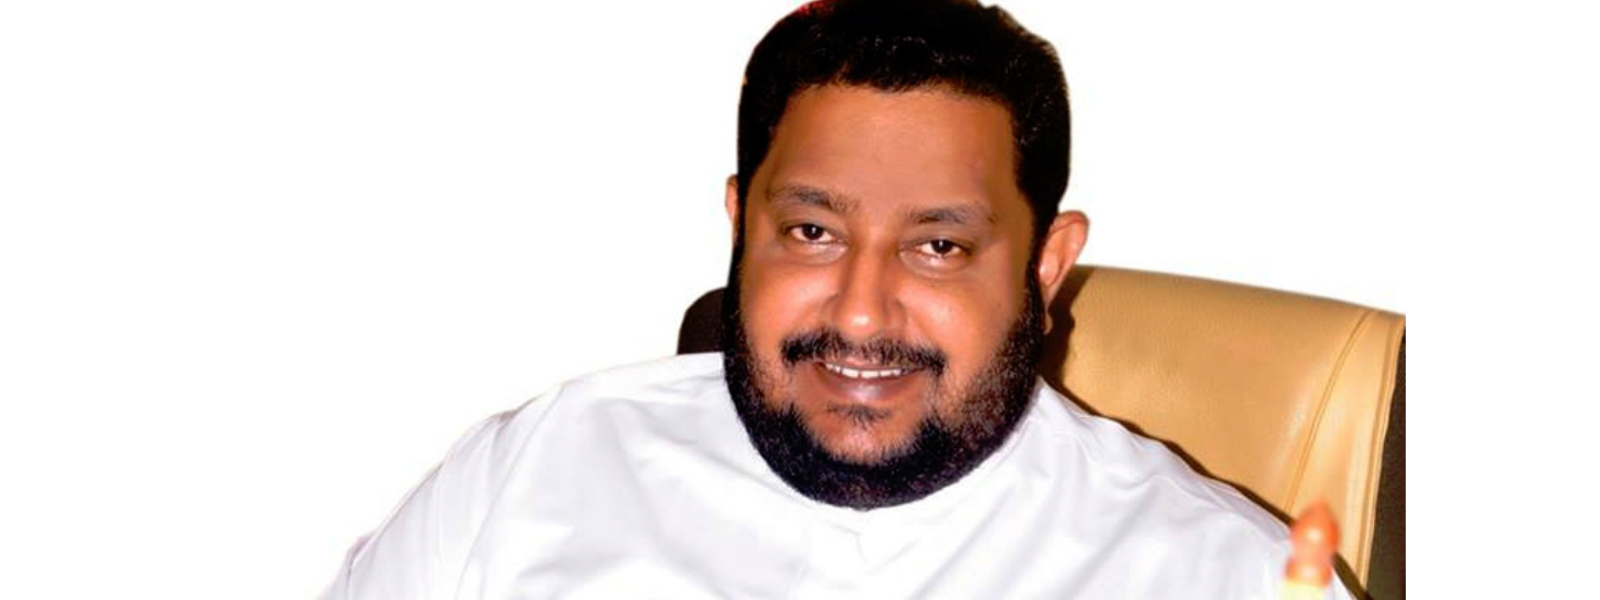 "SLFP to complete party reforms in 45 days